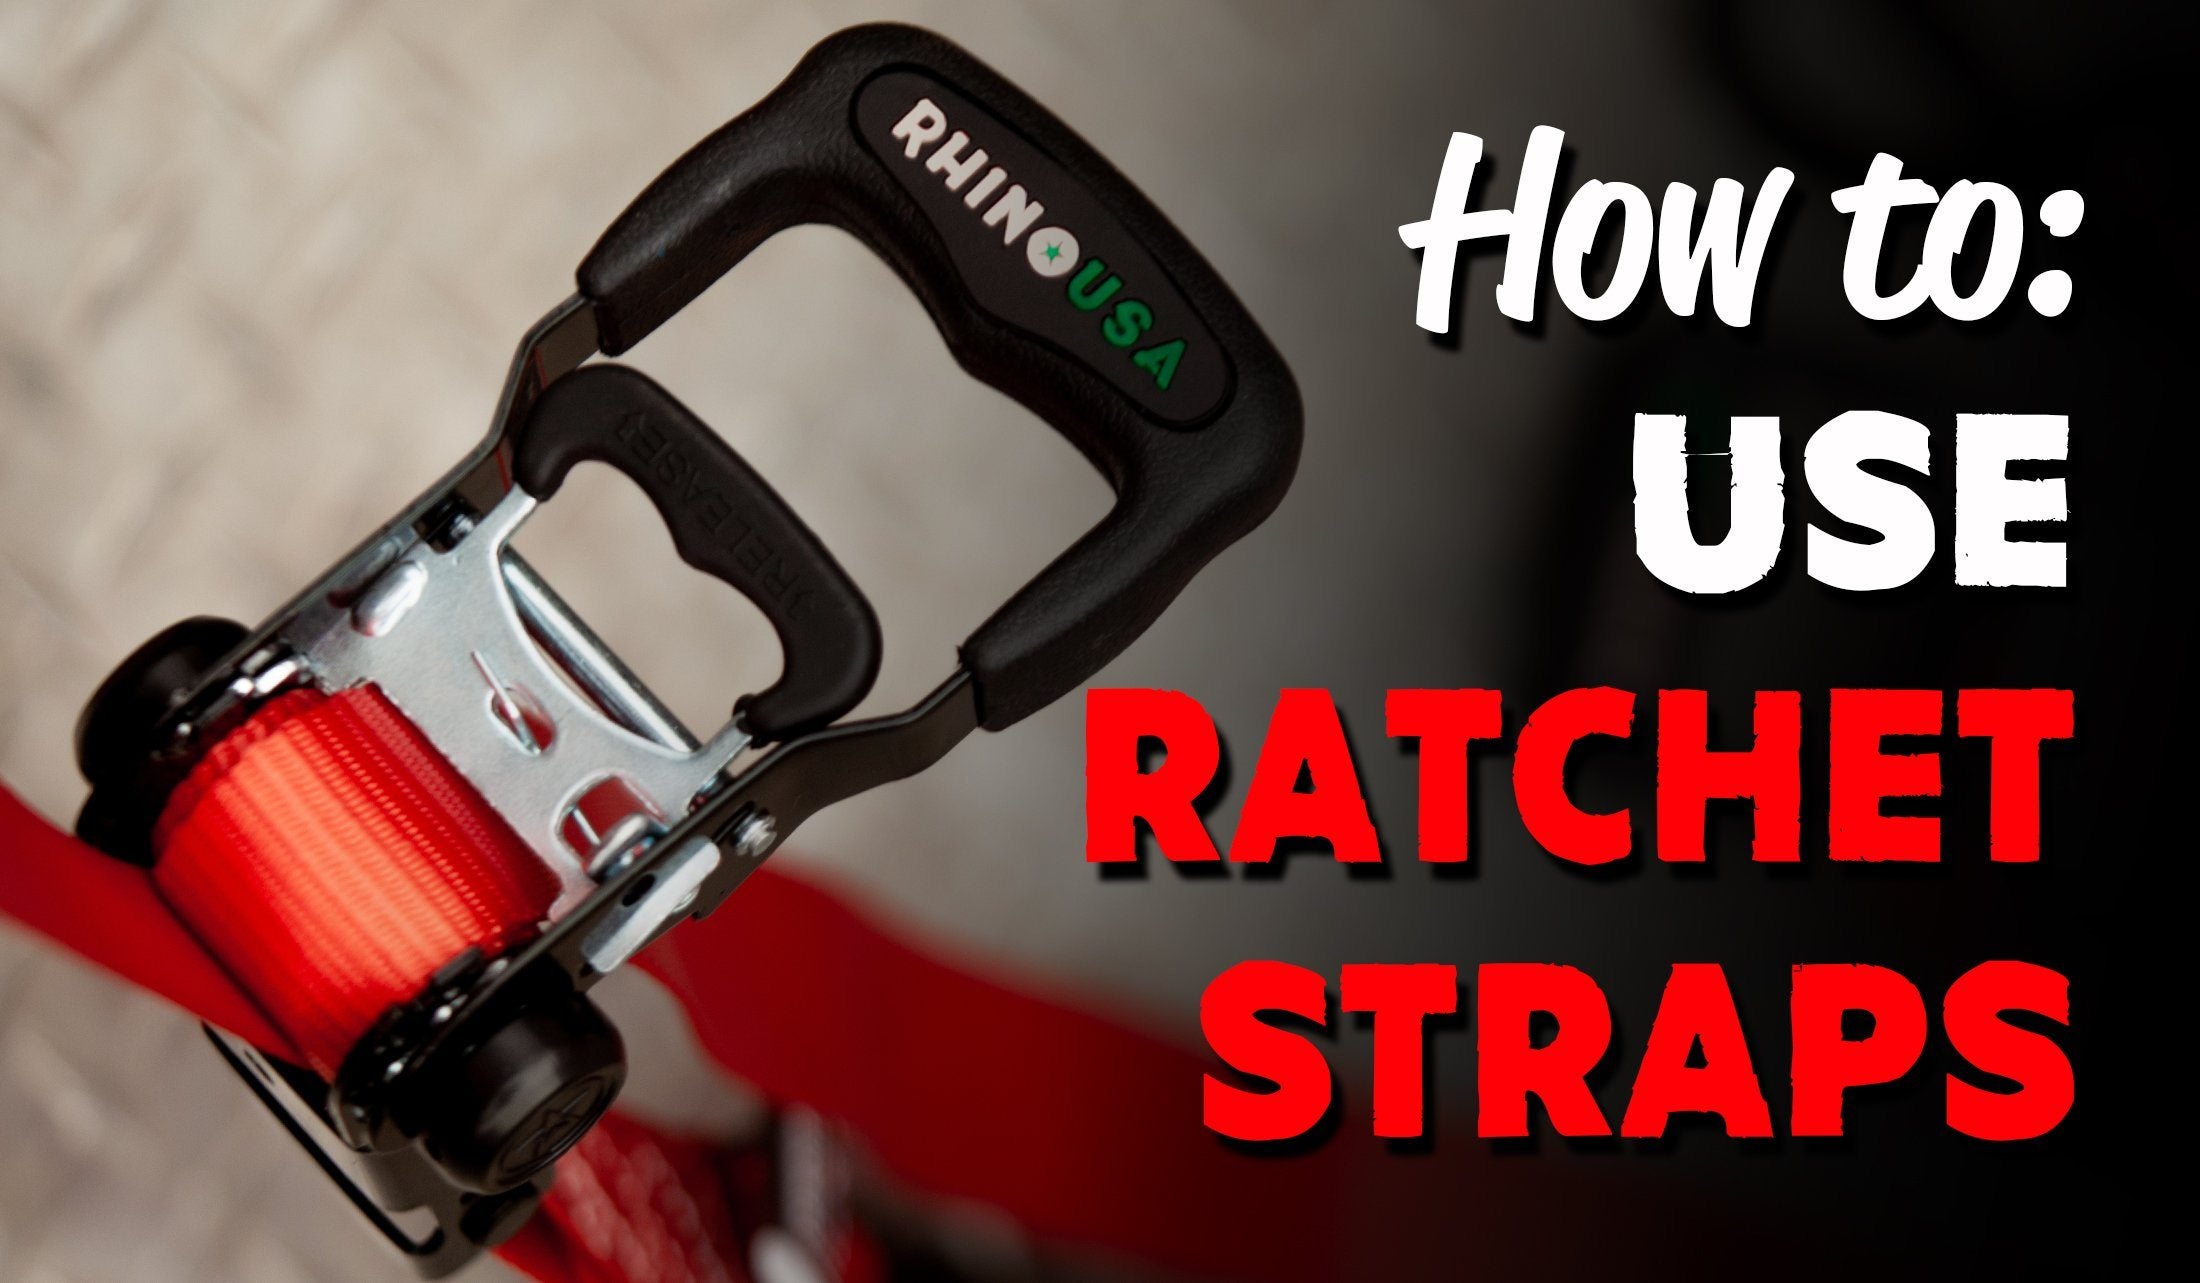 How to use Ratchet Straps in 3 Easy Steps! – Rhino USA